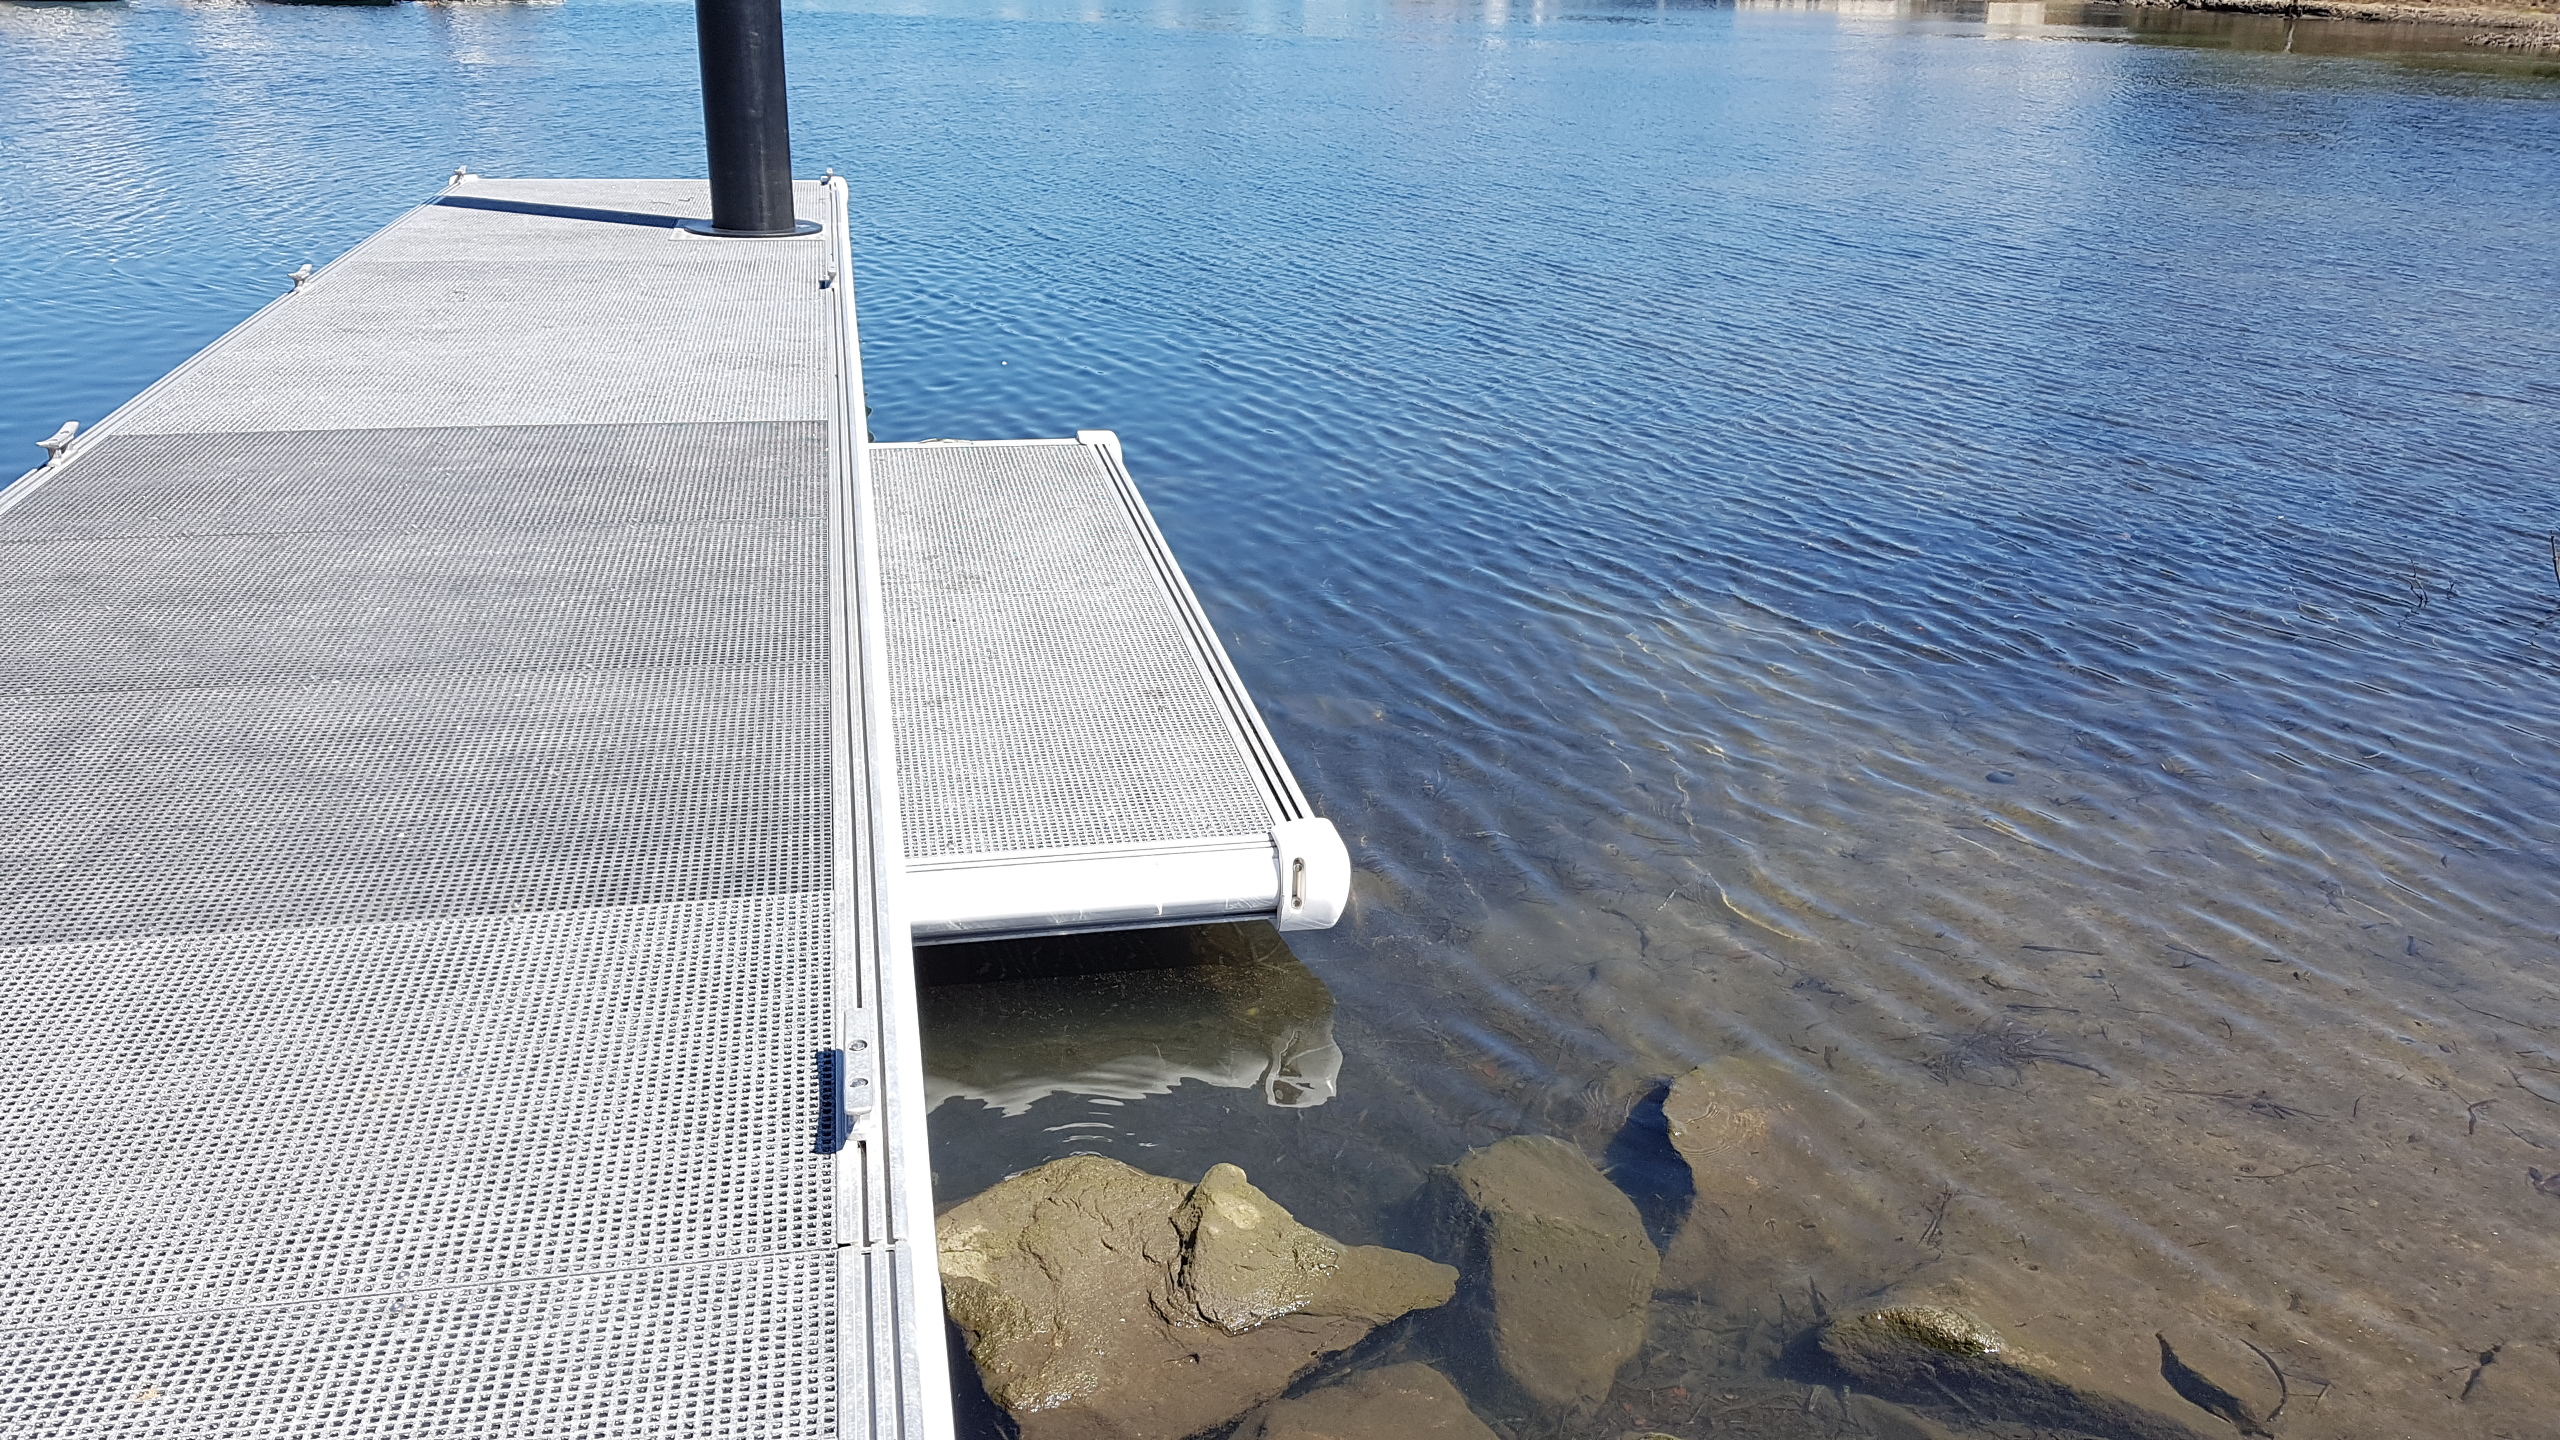 Pontoon for small craft users